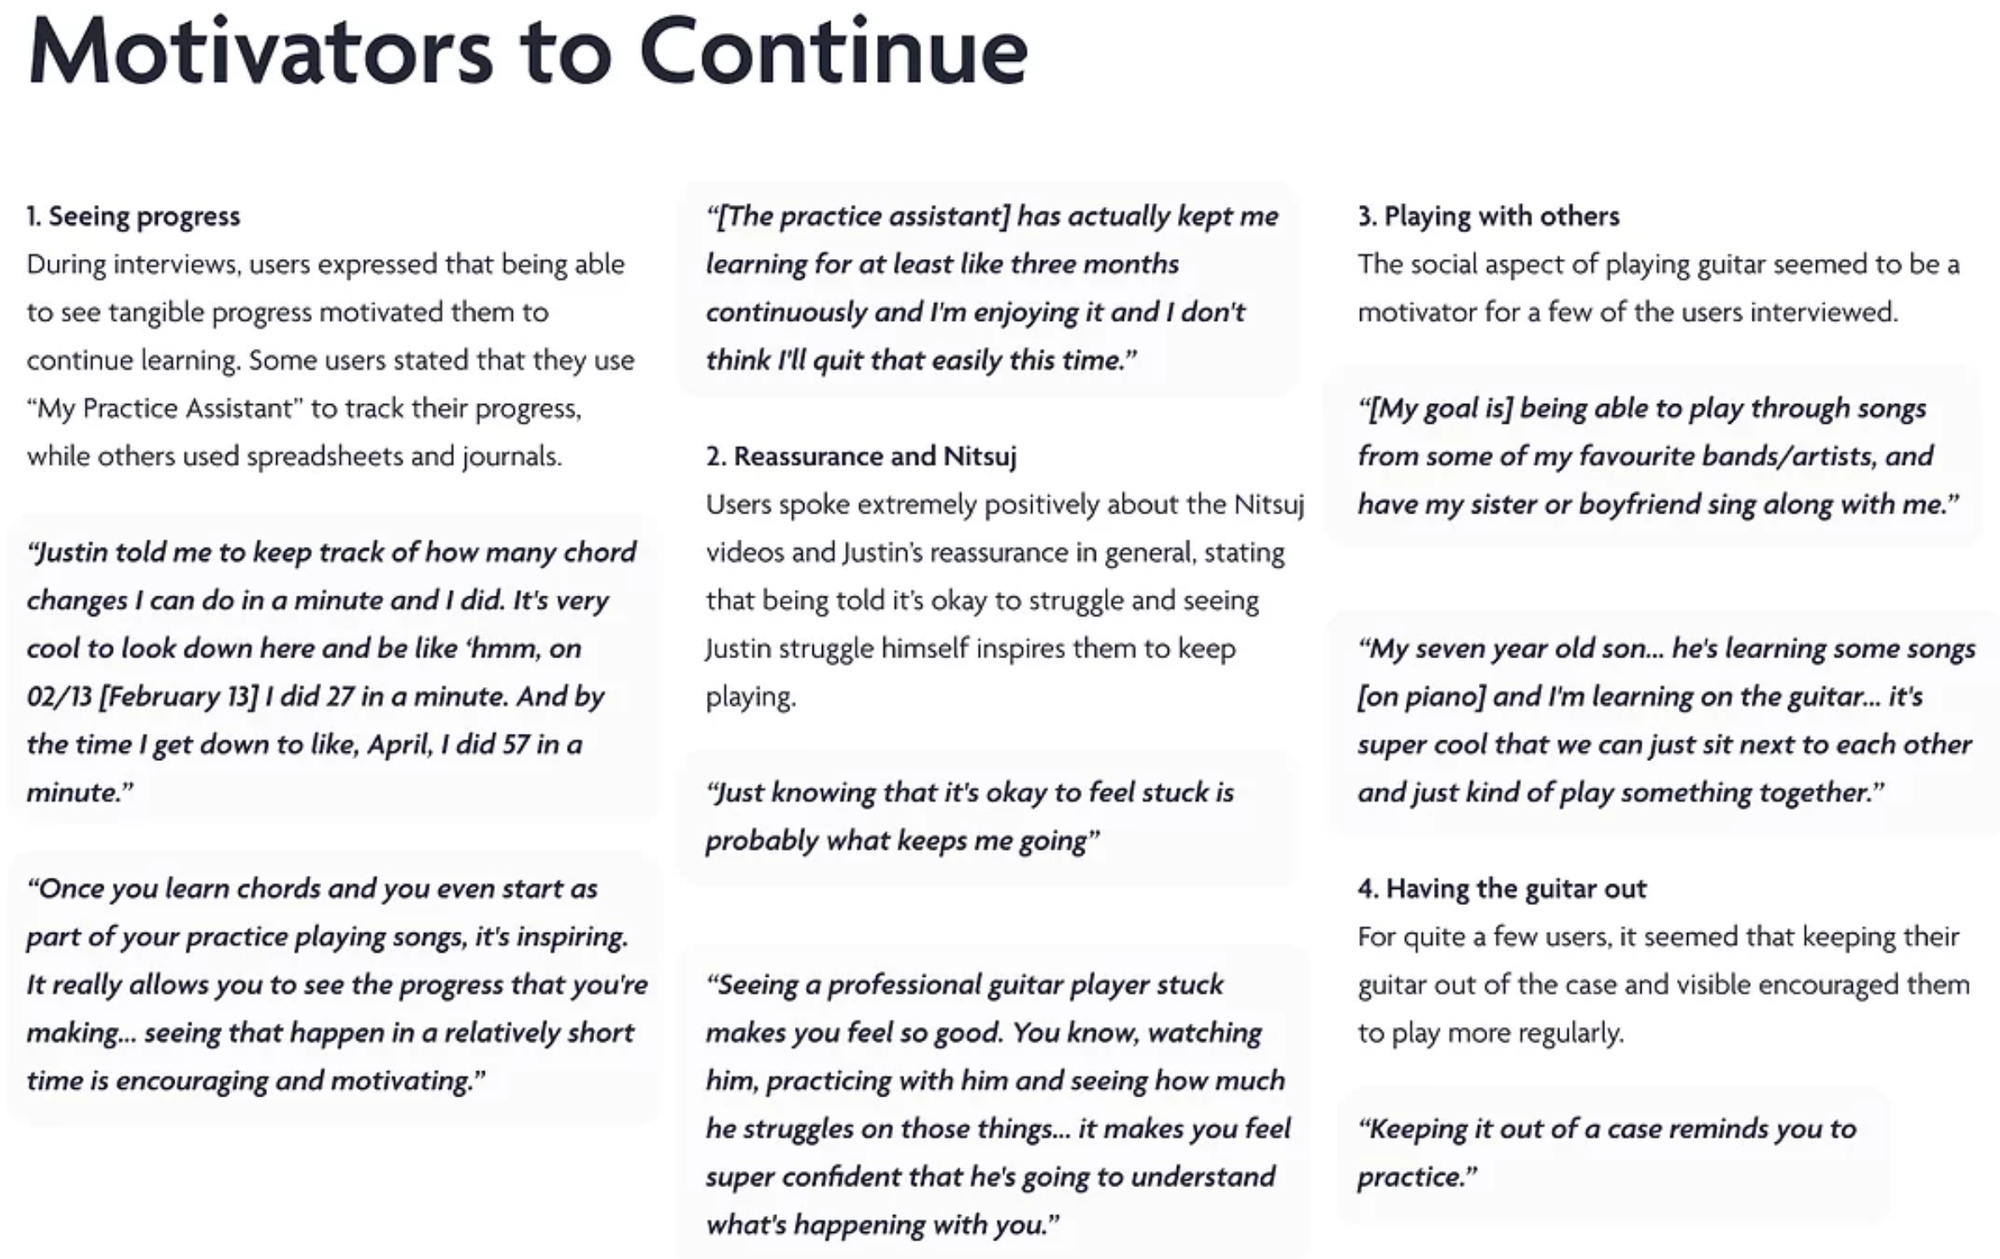 Figure 4: A screenshot of the Justin Guitar insight report. This page highlights 4 motivations that guitar students interviewed have for continuing their learning. These motivators were: 1) seeing progress, 2) reassurance and Nitsuj, 3) playing with others and 3) having the guitar out. User quotes are provided for each motivation listed.